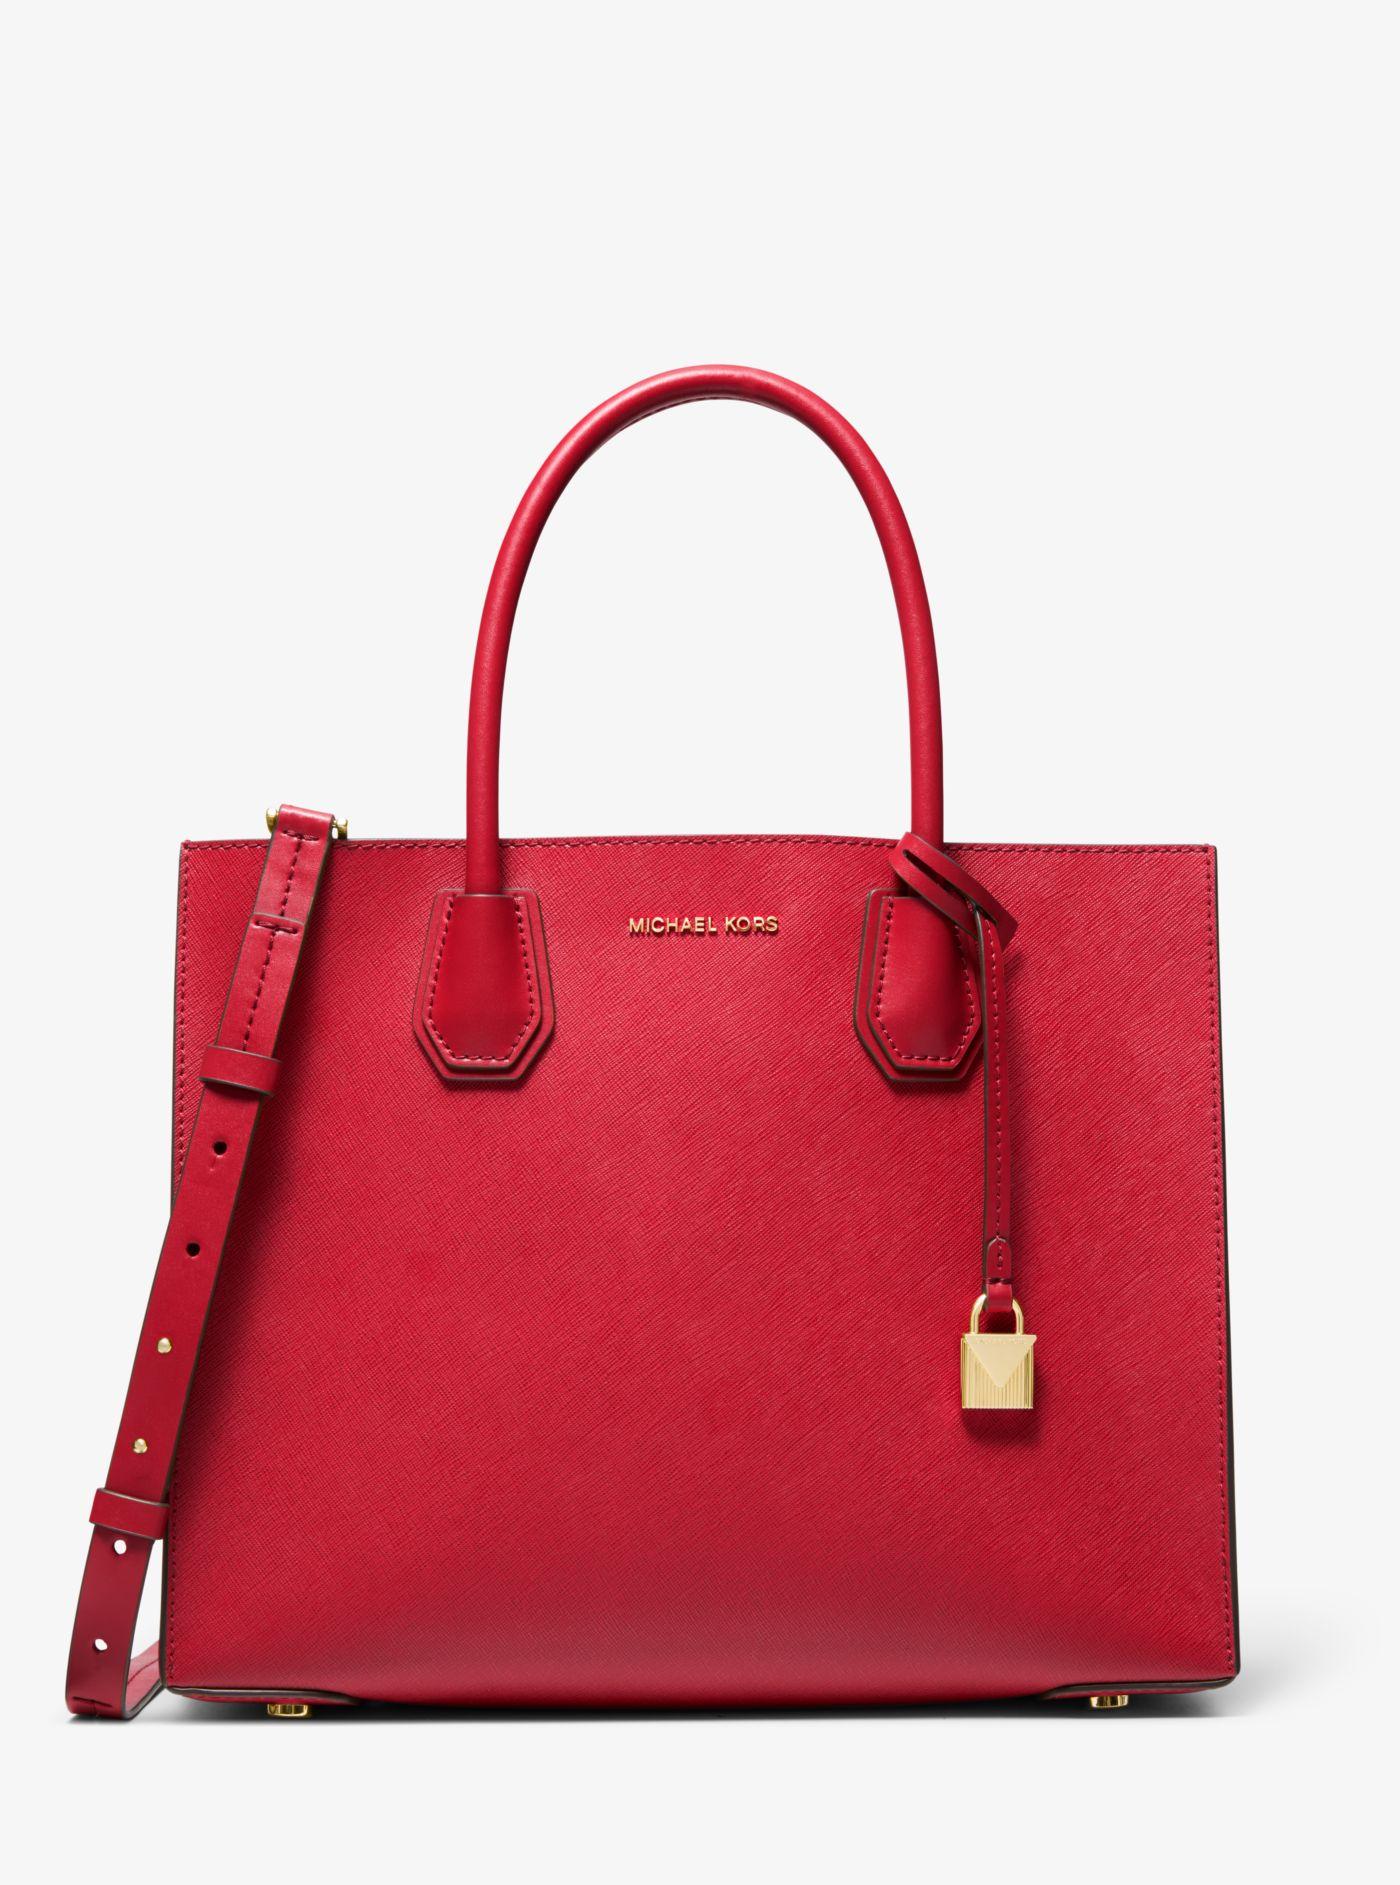 Michael Kors Mercer Large Saffiano Leather Tote Bag in Bright Red (Red ...